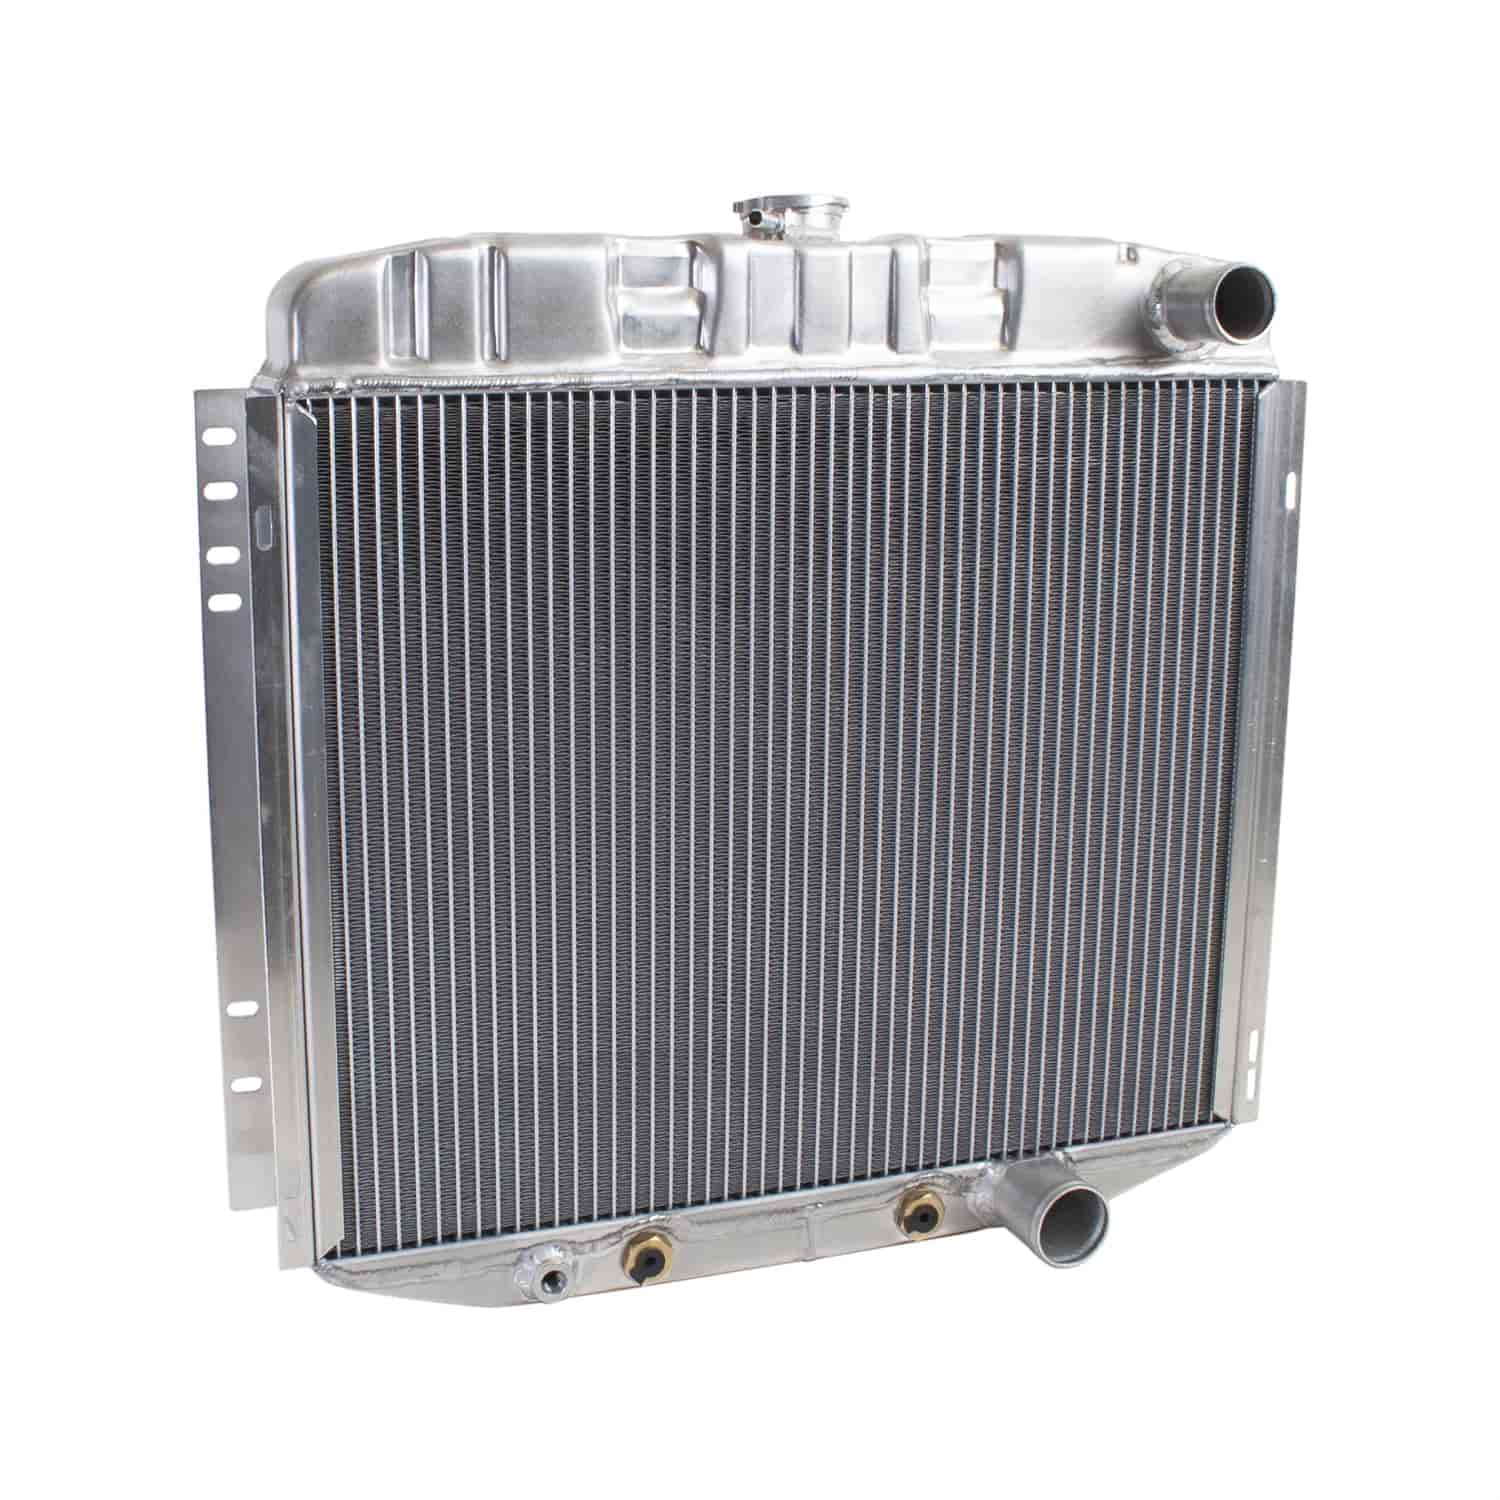 ExactFit Radiator for 1967-1970 Ford Mustang/Mercury Cougar with Early Small Block